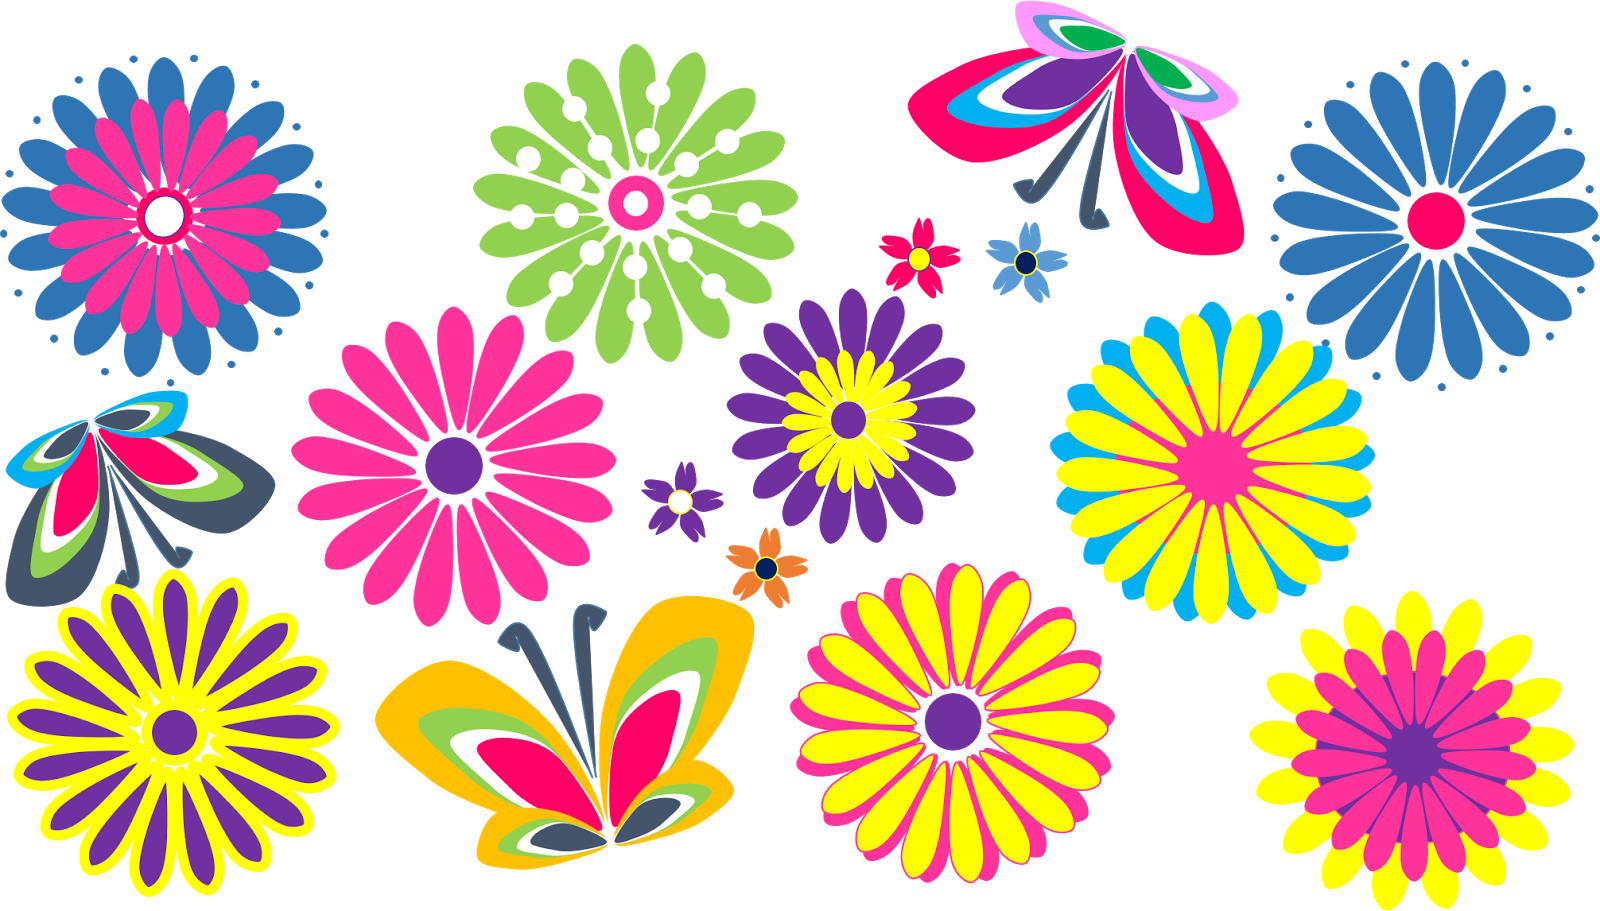 Clip Arts Related To : flower. view all Transparent Floral Cliparts). 